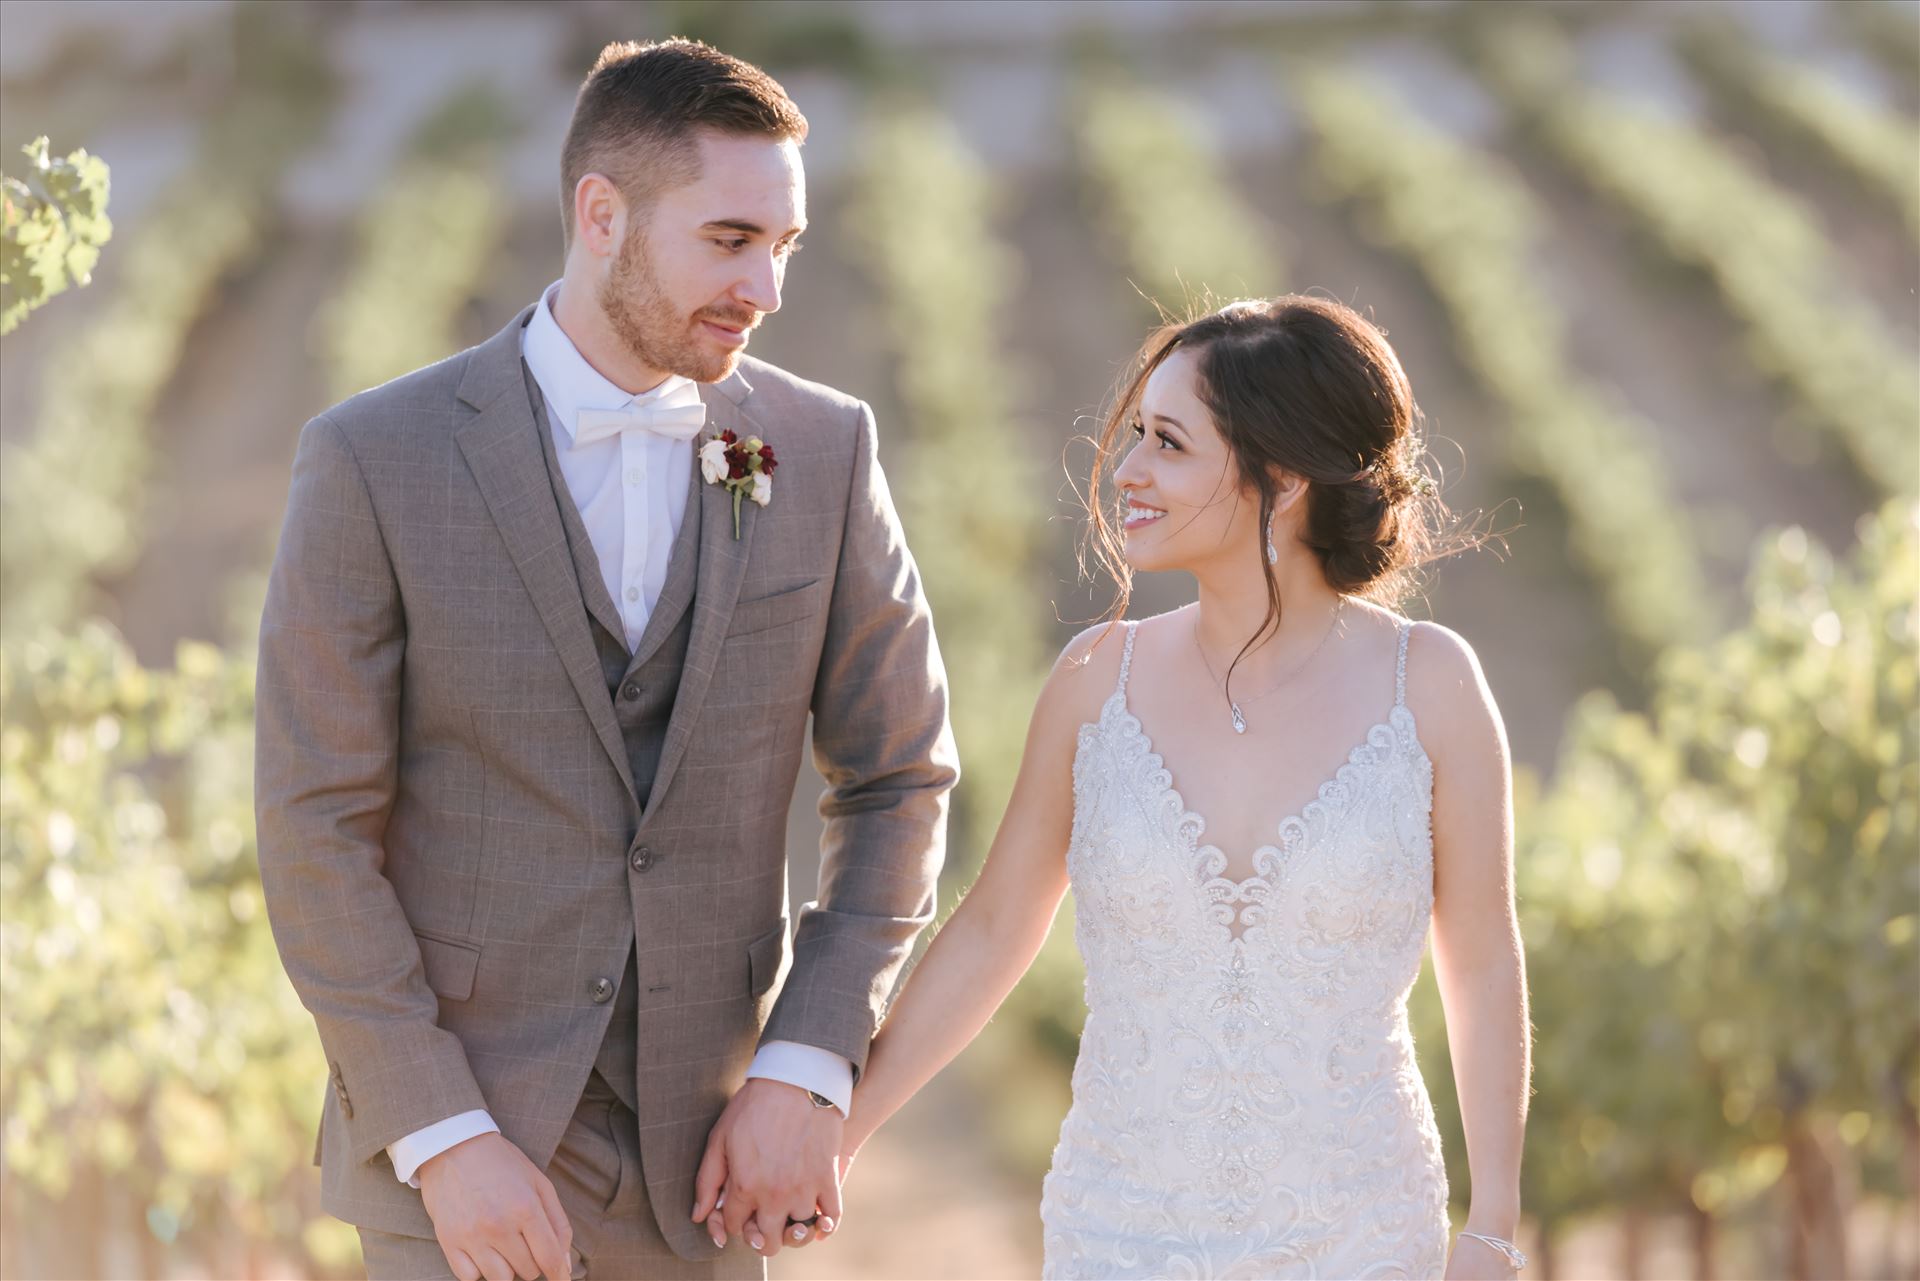 FW-6933.JPG Tooth and Nail Winery elegant and formal wedding in Paso Robles California wine country by Mirror's Edge Photography, San Luis Obispo County Wedding Photographer. Bride and Groom walking through the vineyards in Paso Robles California wine country wedding by Sarah Williams